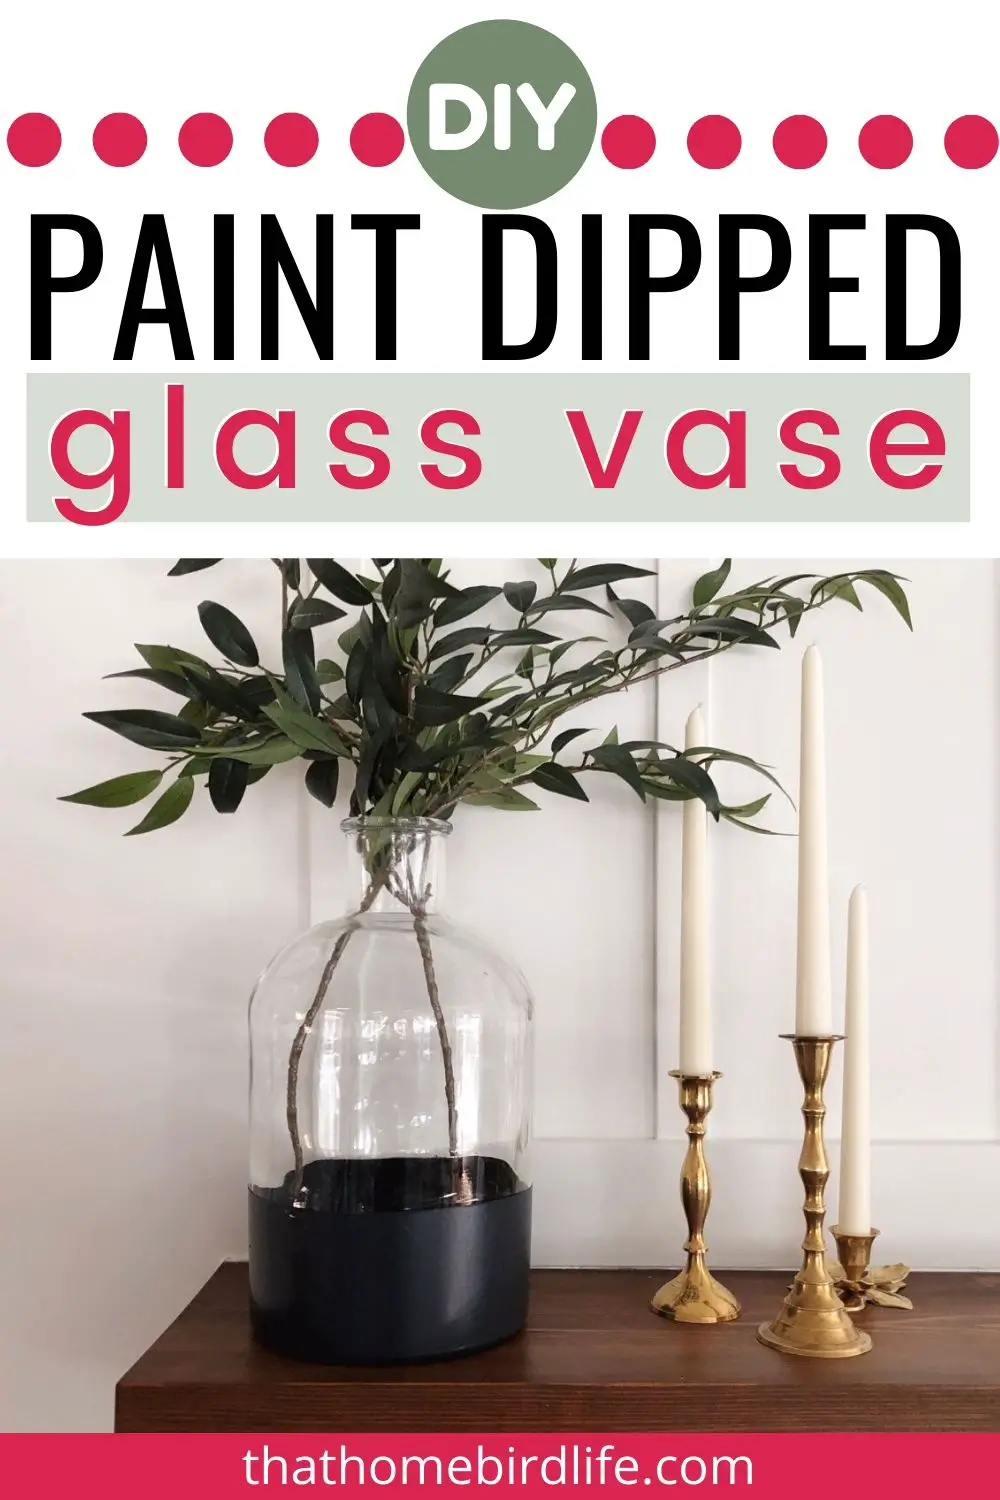 How to Make a DIY Paint Dipped Glass Vase